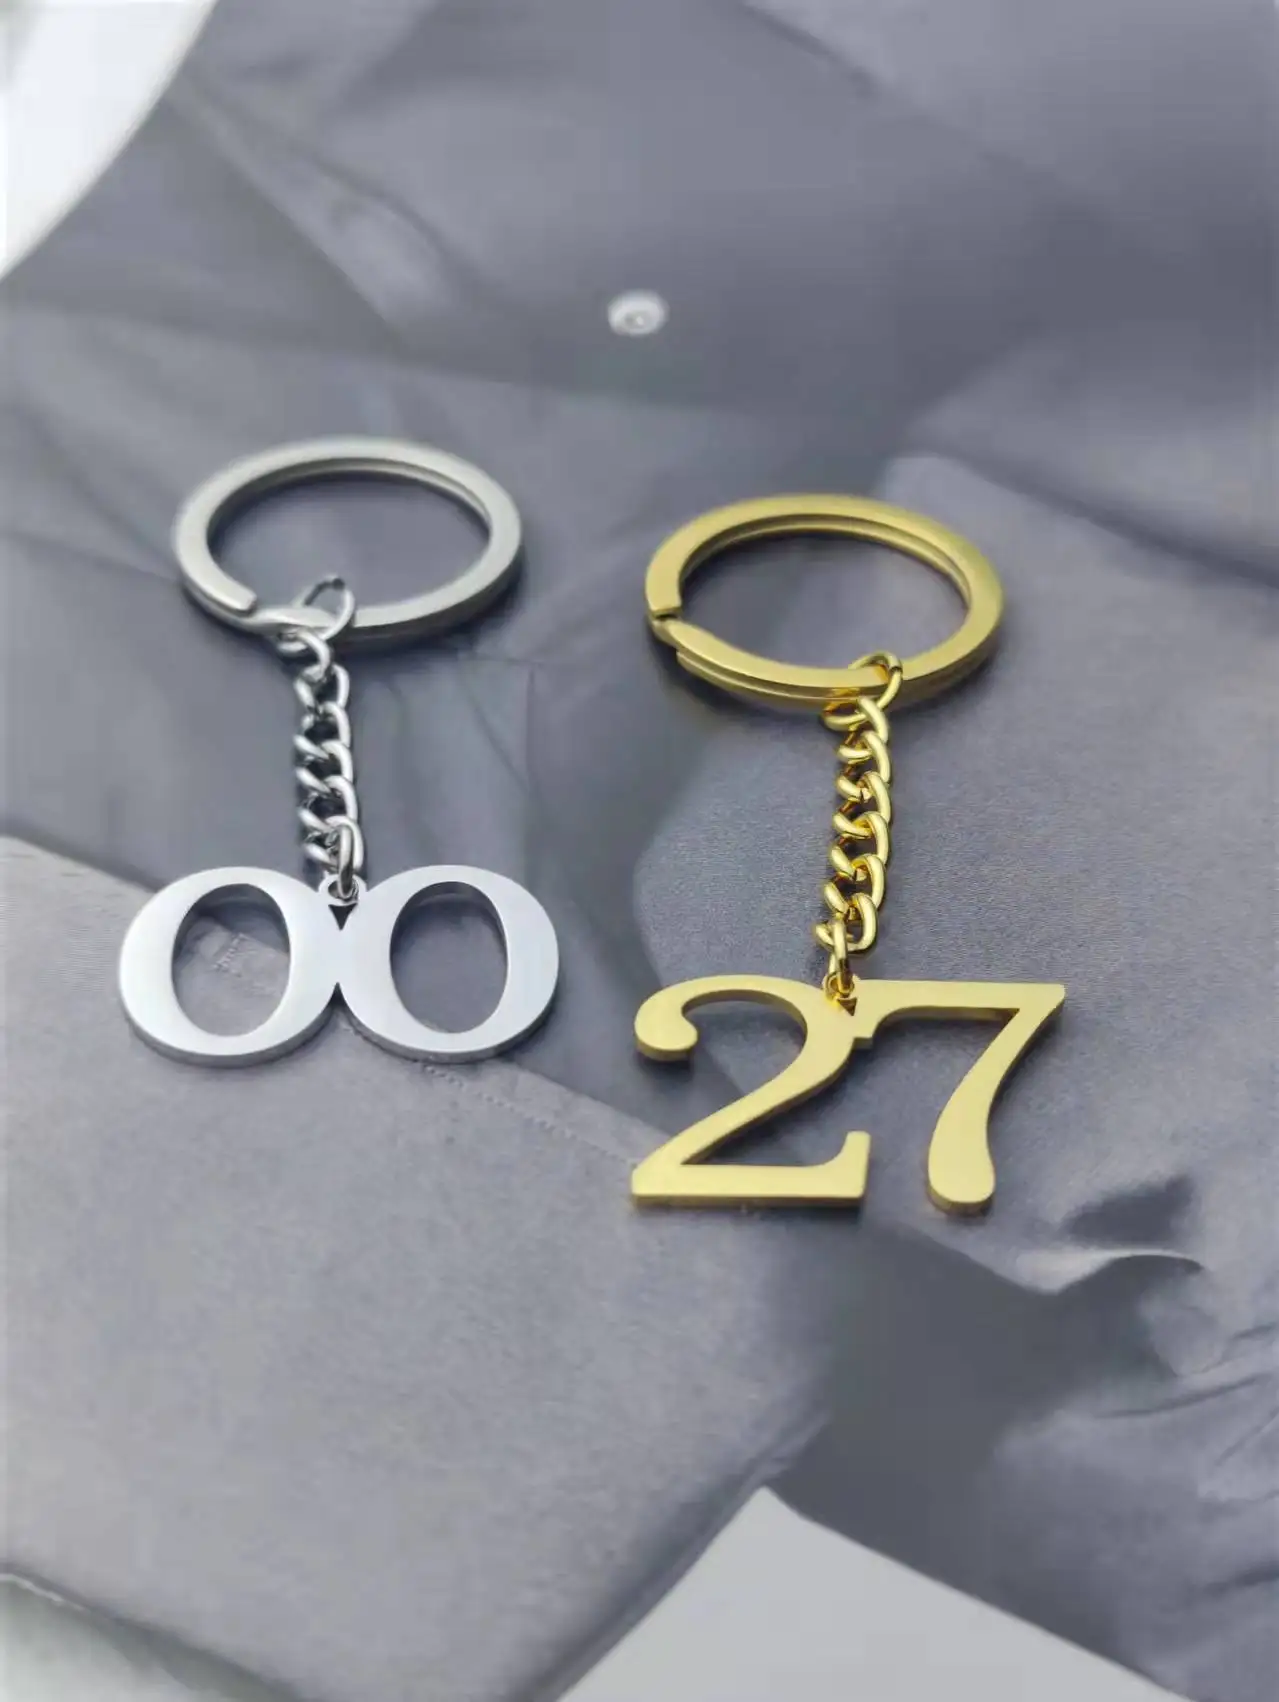 Personalized Key Chain Custom Key Ring Initials Letter Drive Safe Stainless Steel Jewelry For Men Women Keychain Friends Gifts 2023 pouch bag case protective leather key ring for usb flash drive pendrive memory stick